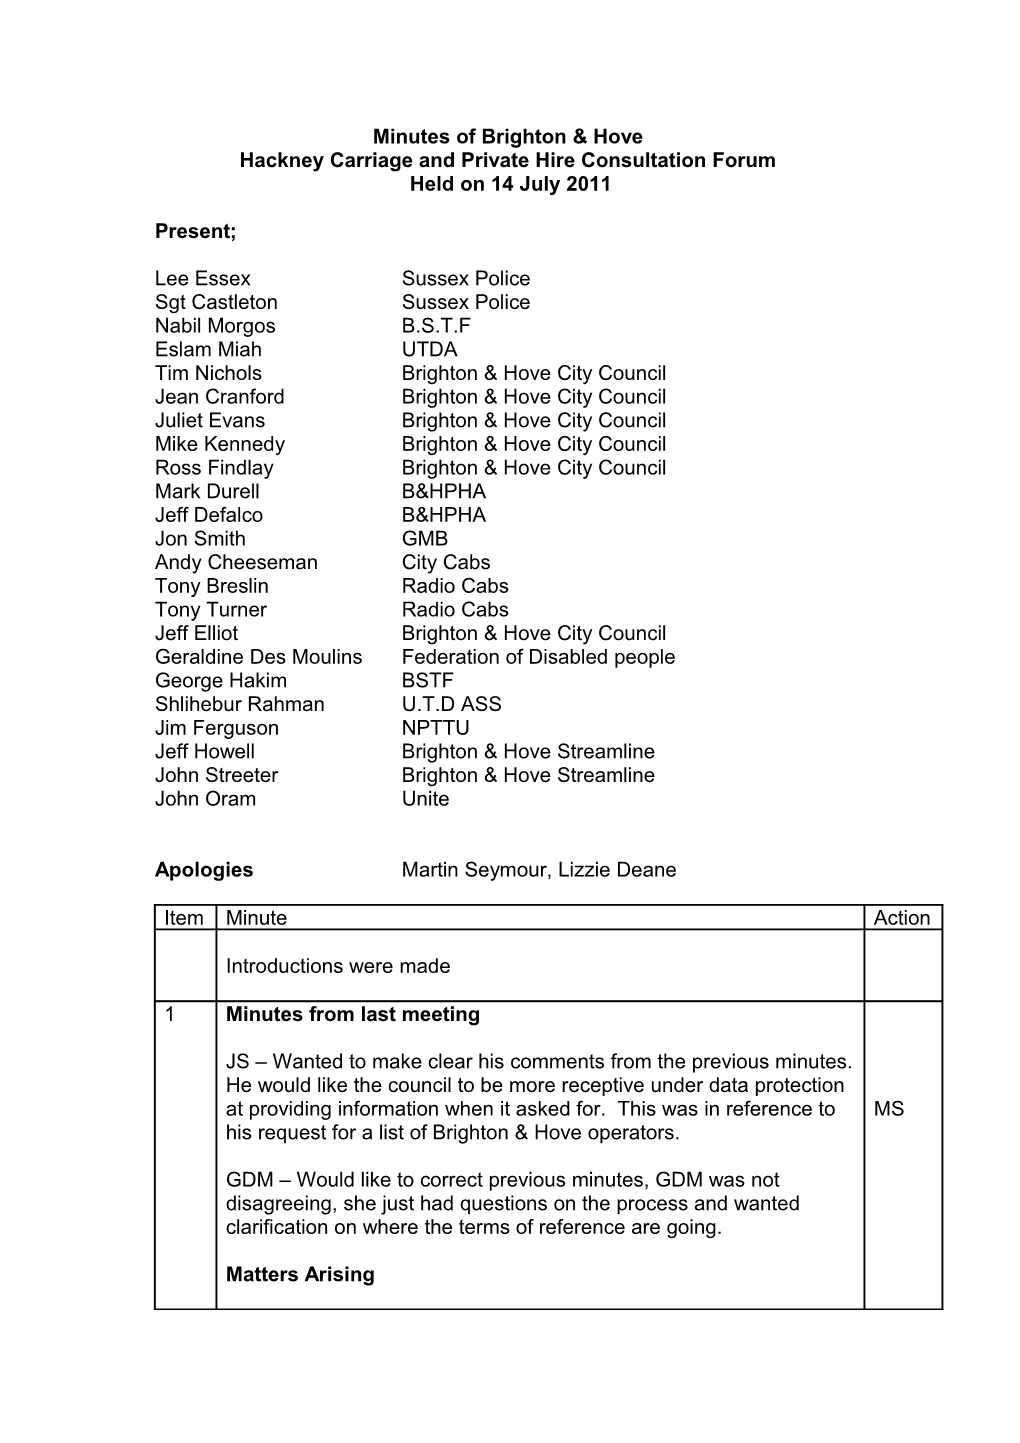 Brighton & Hove Hackney Carriage and Private Hire Consultation Forum Minutes - 17/06/2011